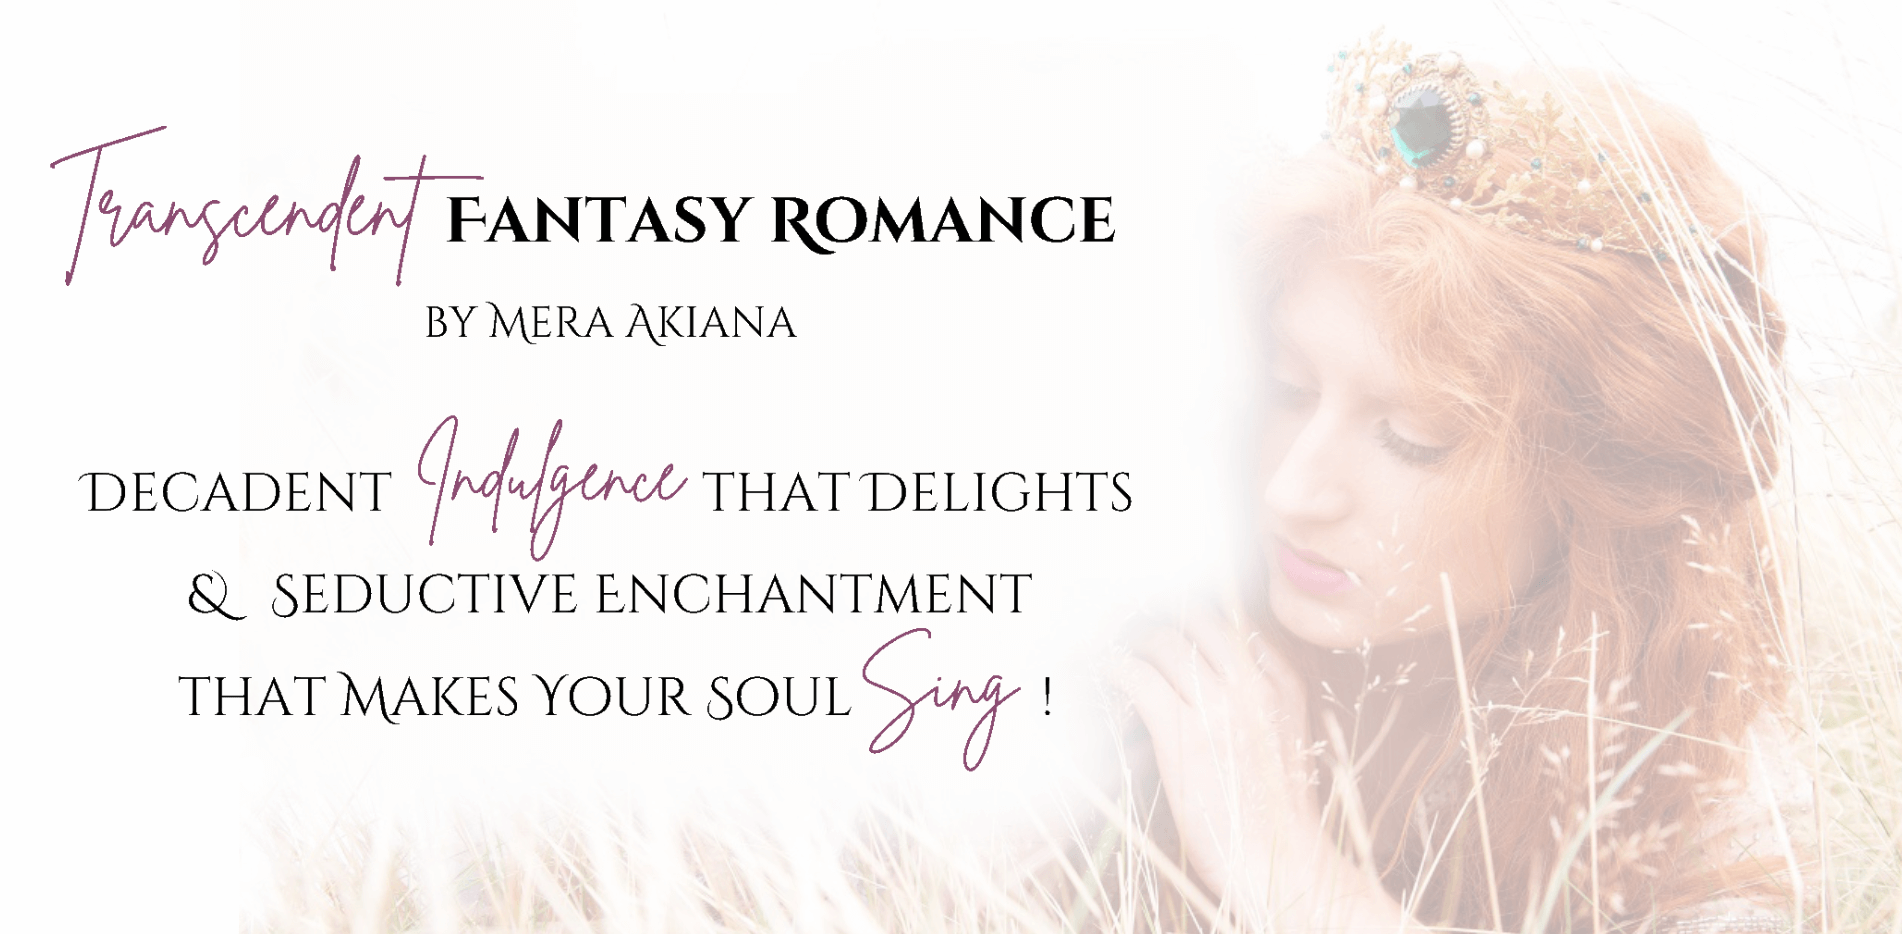 Transcendent Fantasy Romance by Mera Akiana:  Decadent Indulgence that Delights & Seductive Enchantment that Makes Your Soul Sing!